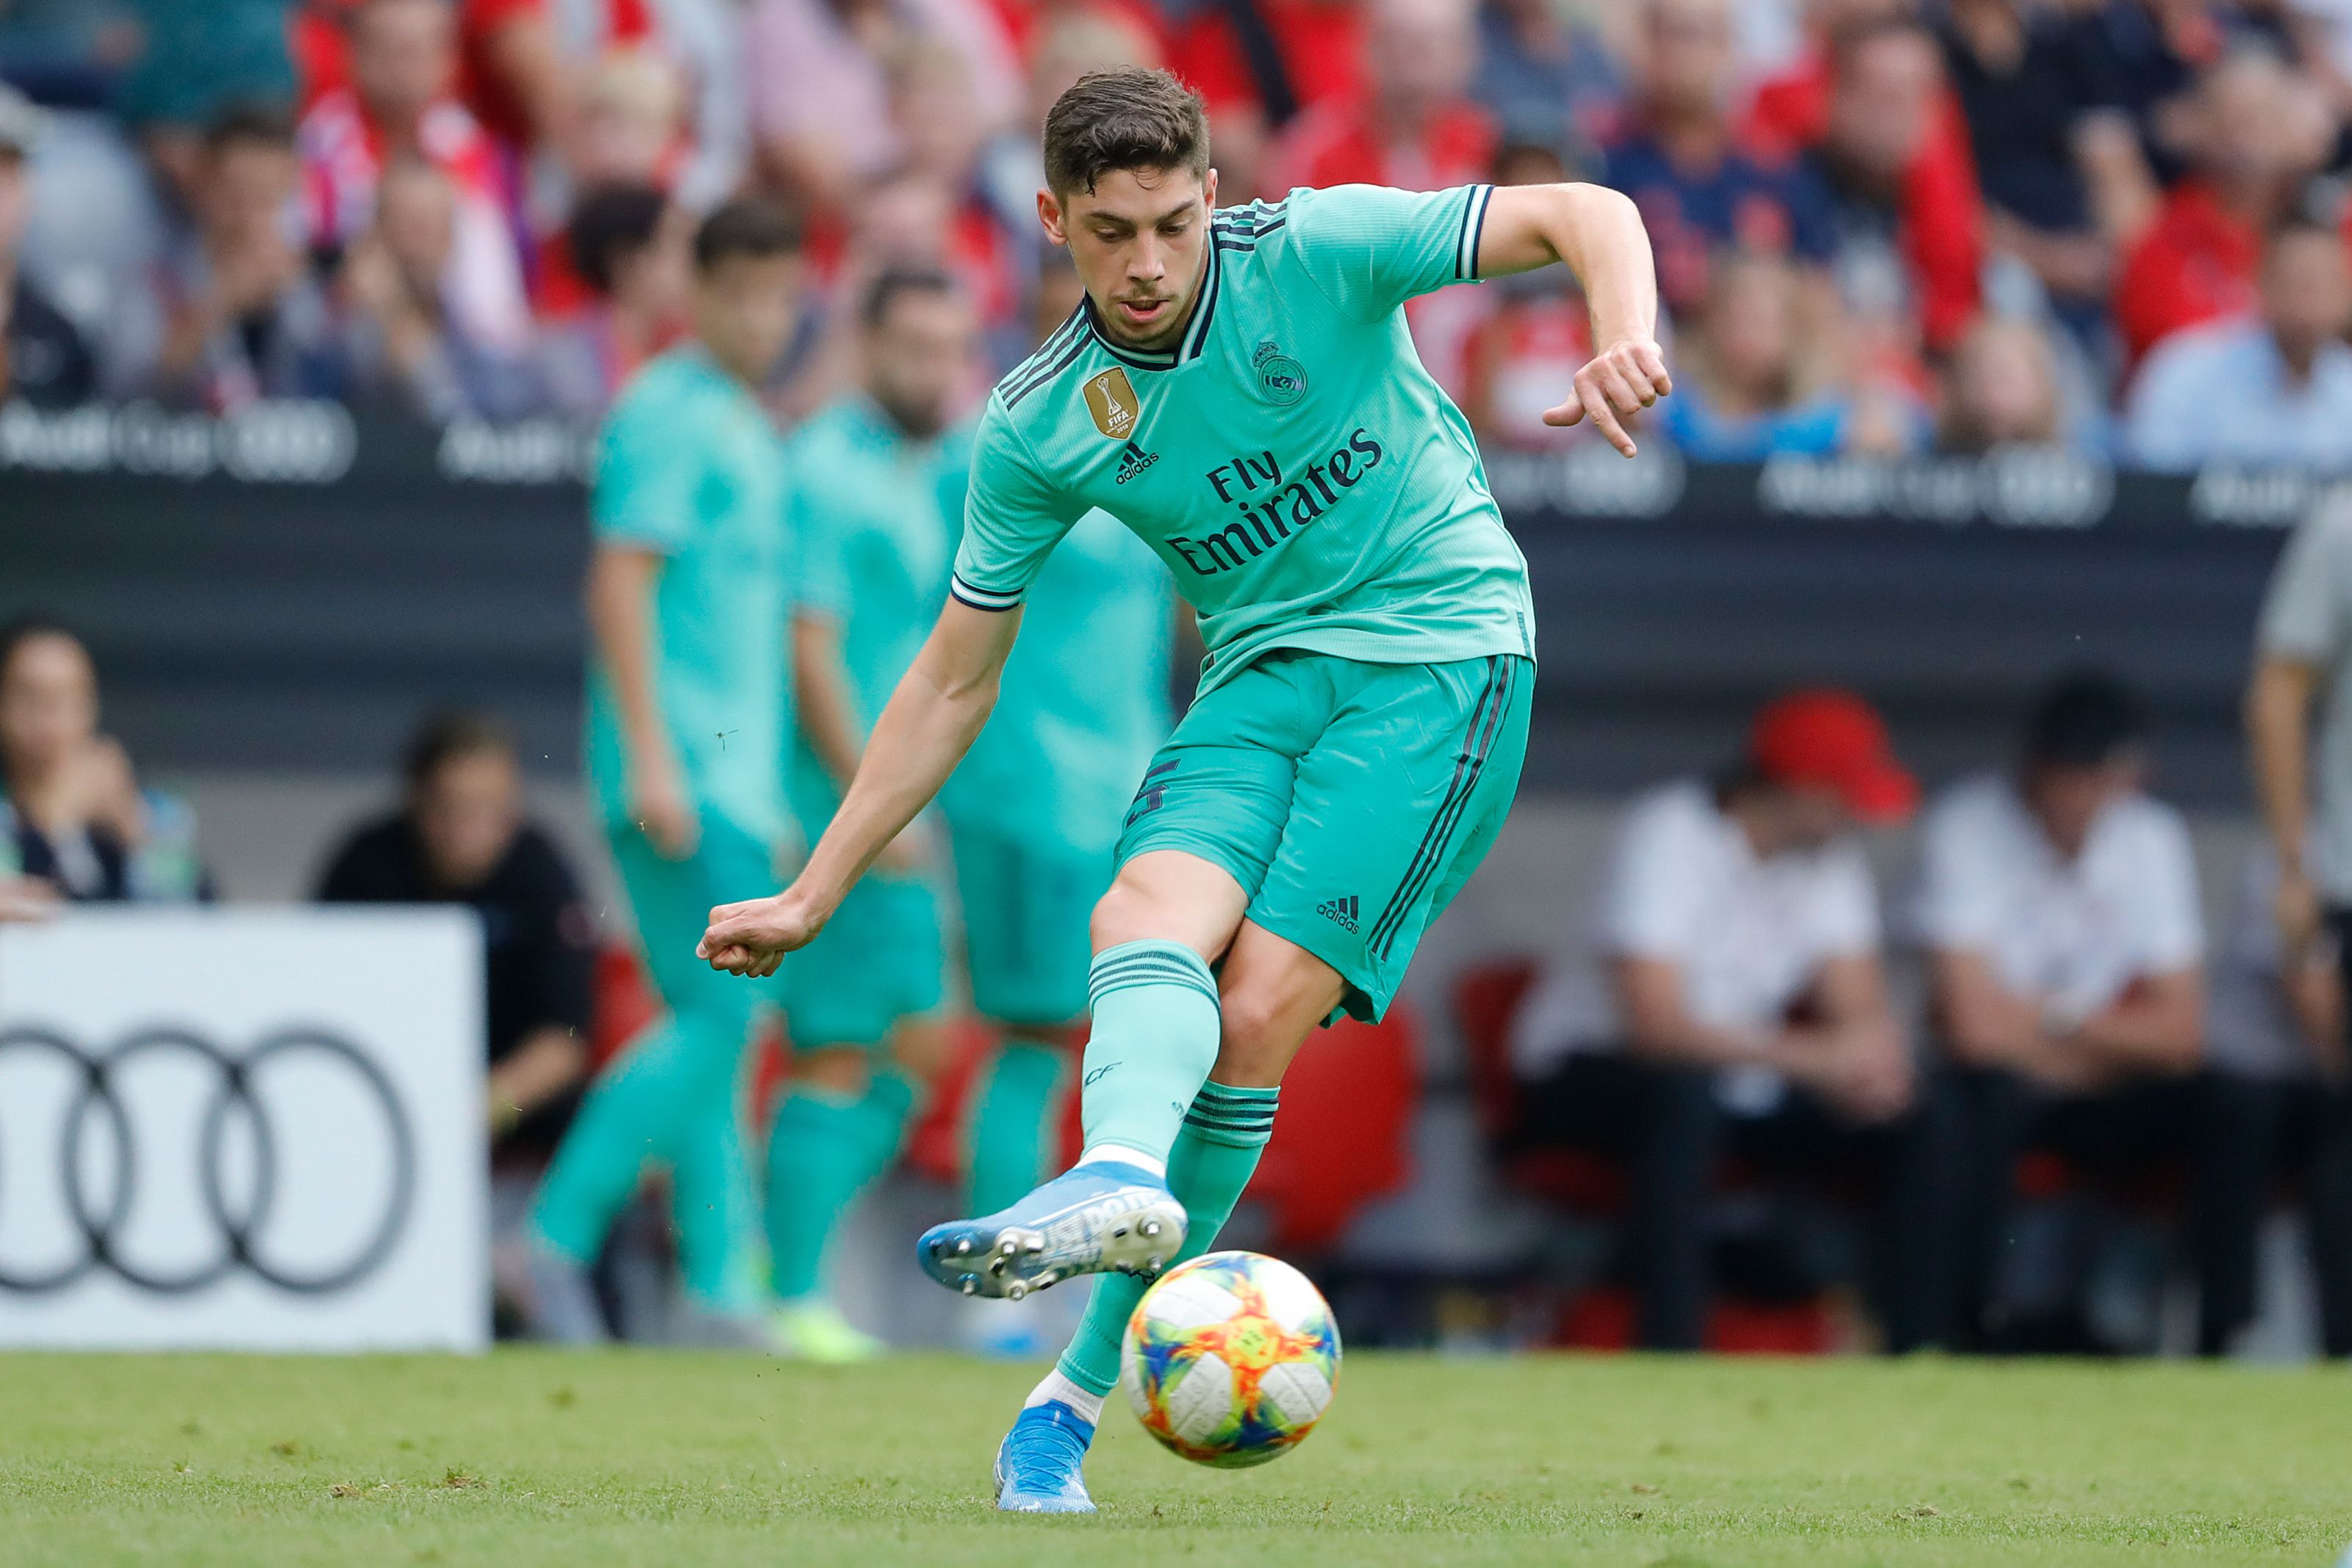 Real Madrid: Fede Valverde could be an option against Sevilla